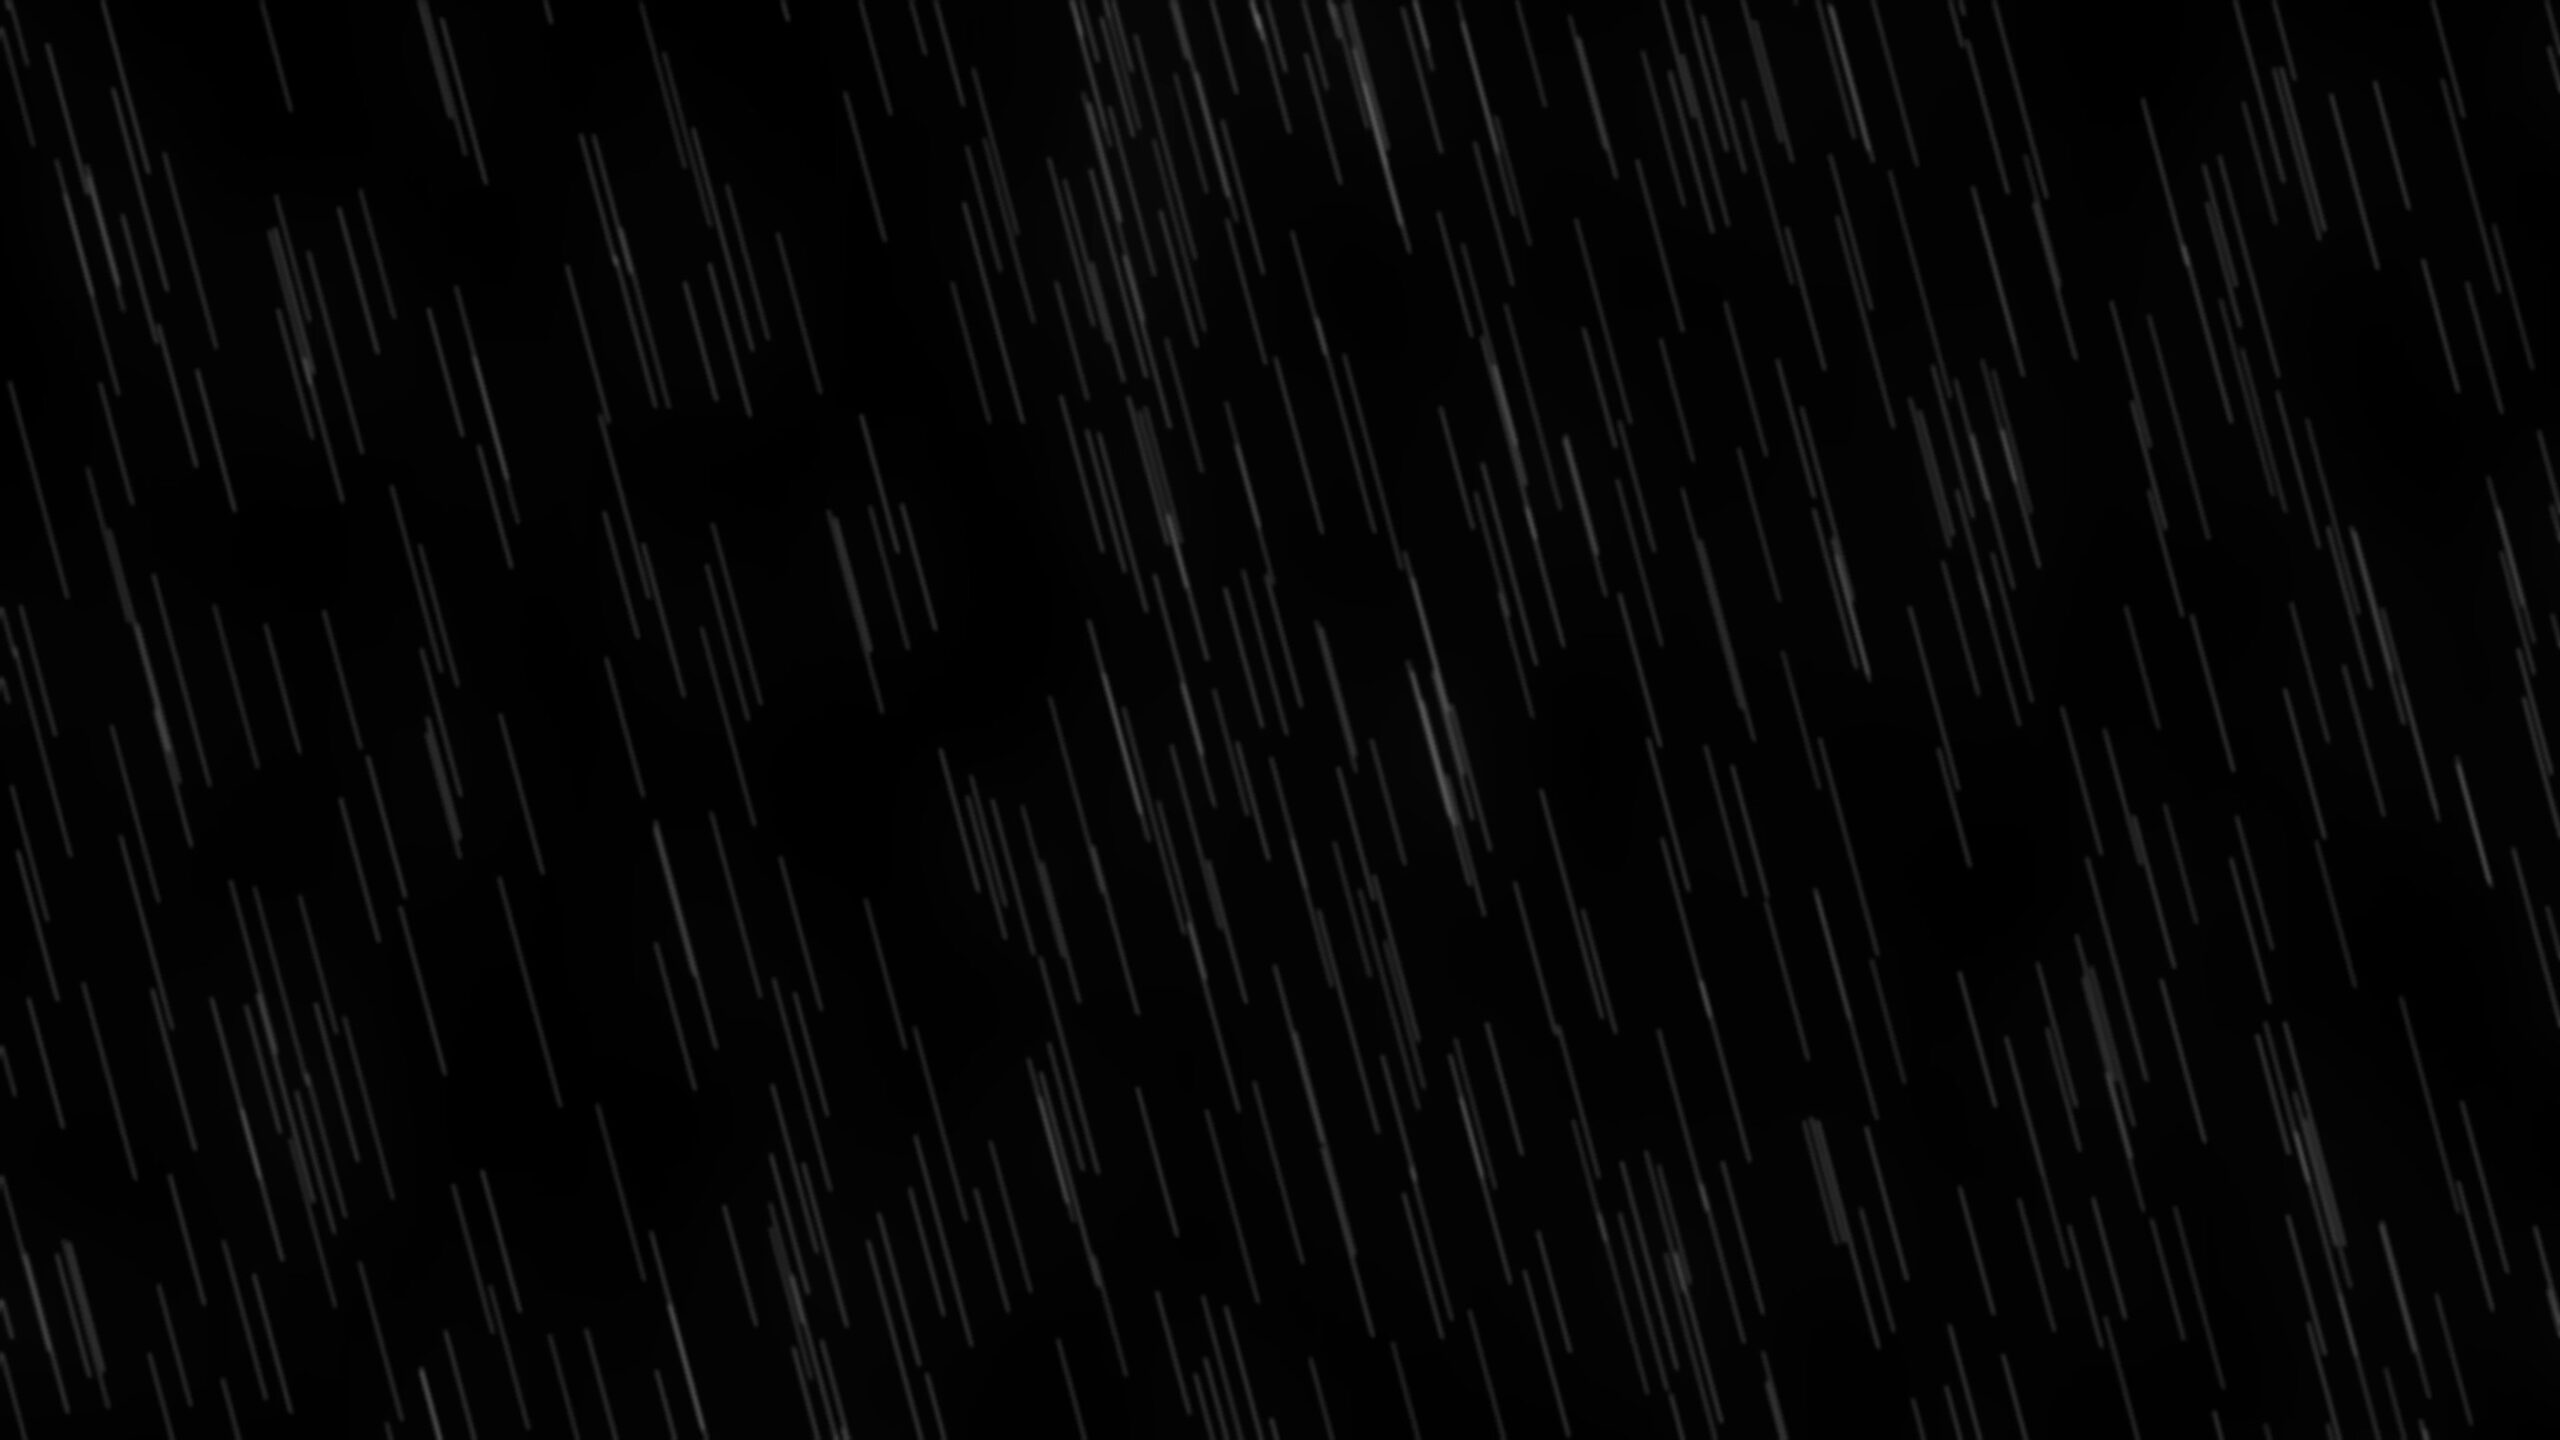 4K Rain Overlay With Sound || Free Overlay Effect For Editing